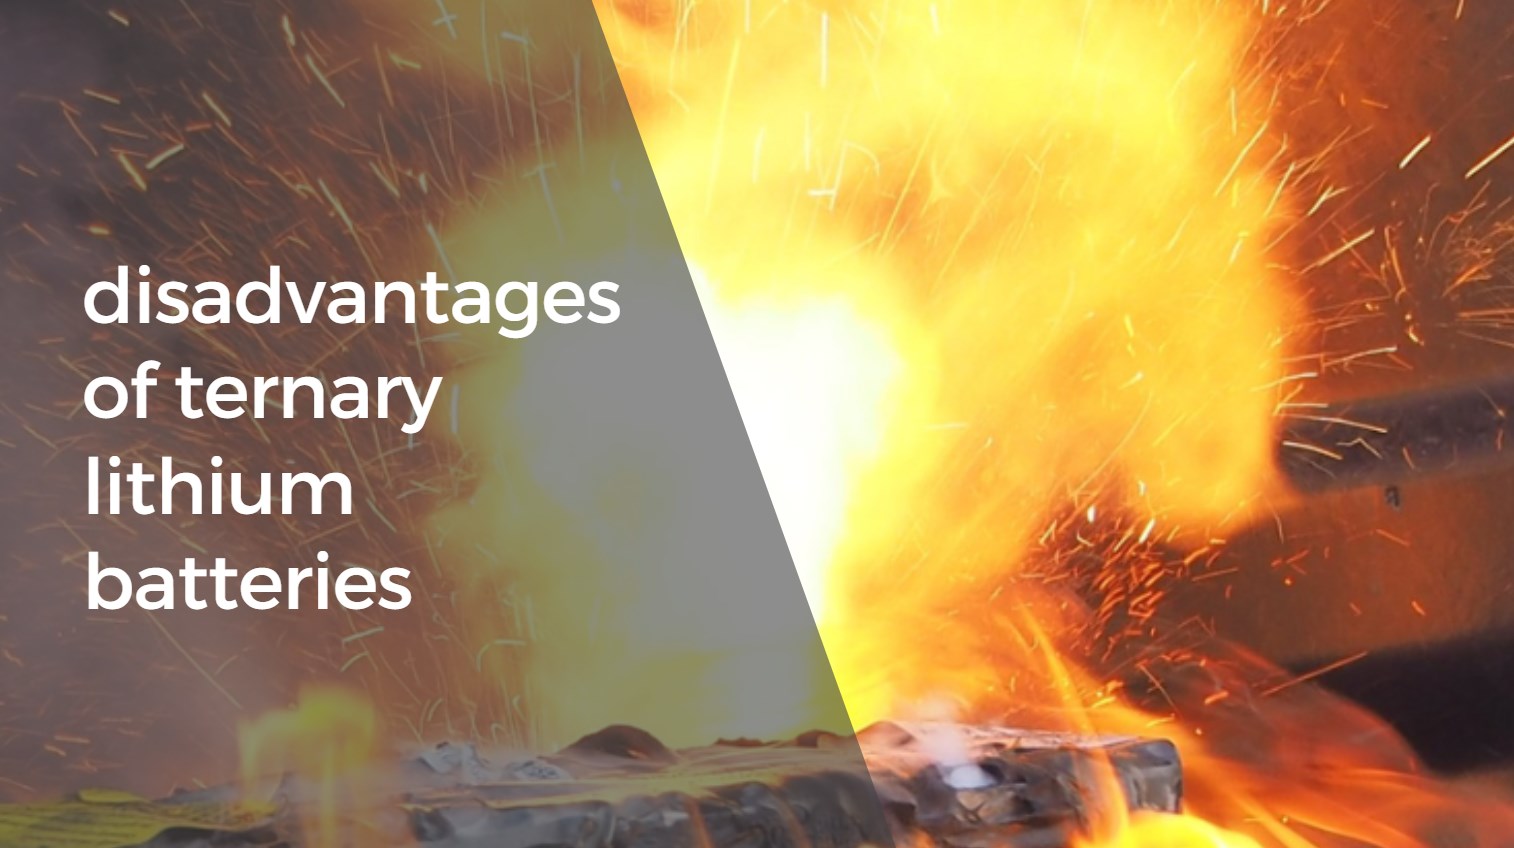 What are the disadvantages of ternary lithium batteries? ncm fire. nmc fire.